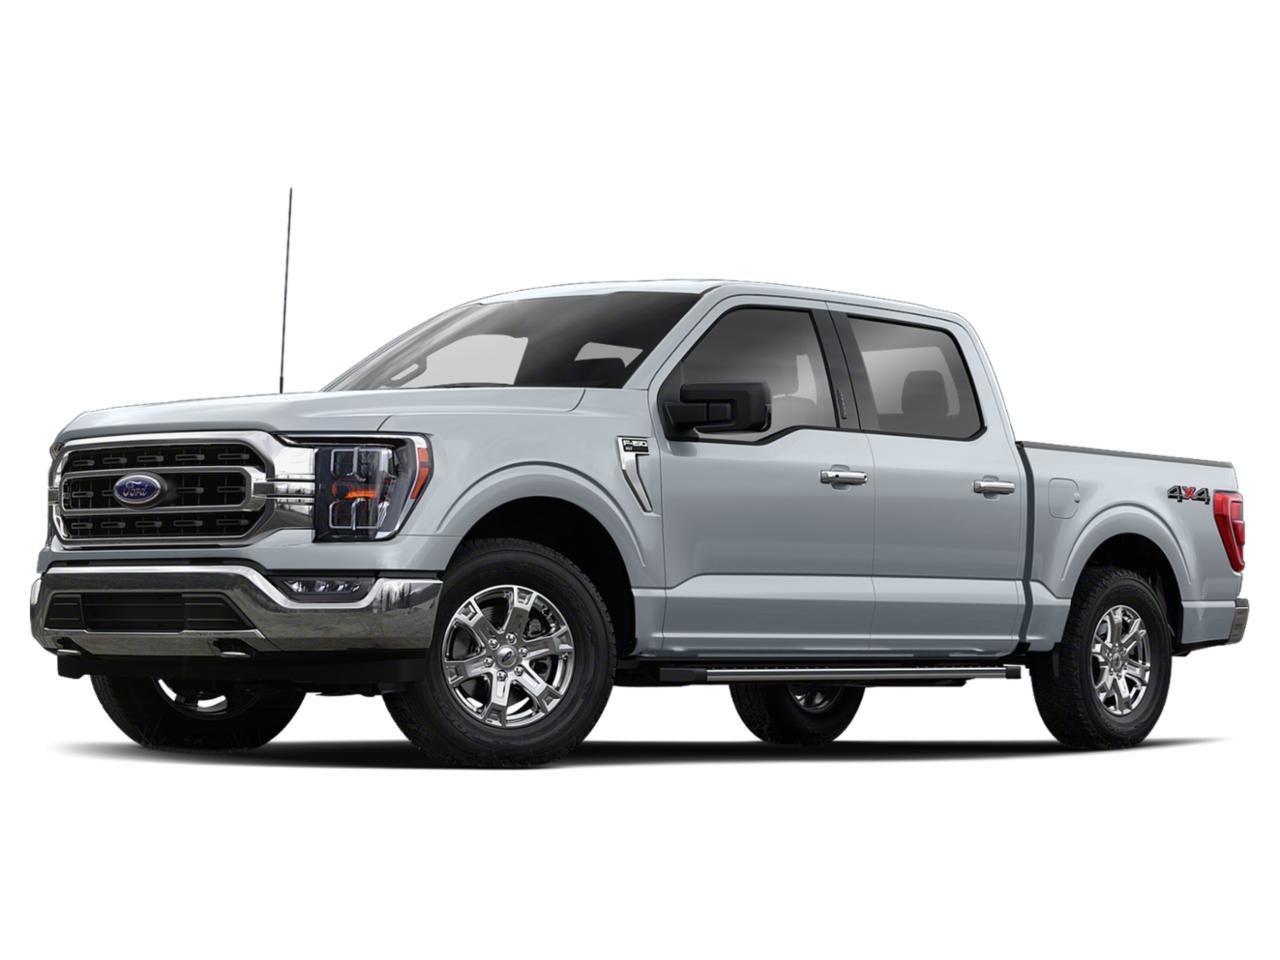 Space White Metallic 2021 Ford F150 Truck for sale at